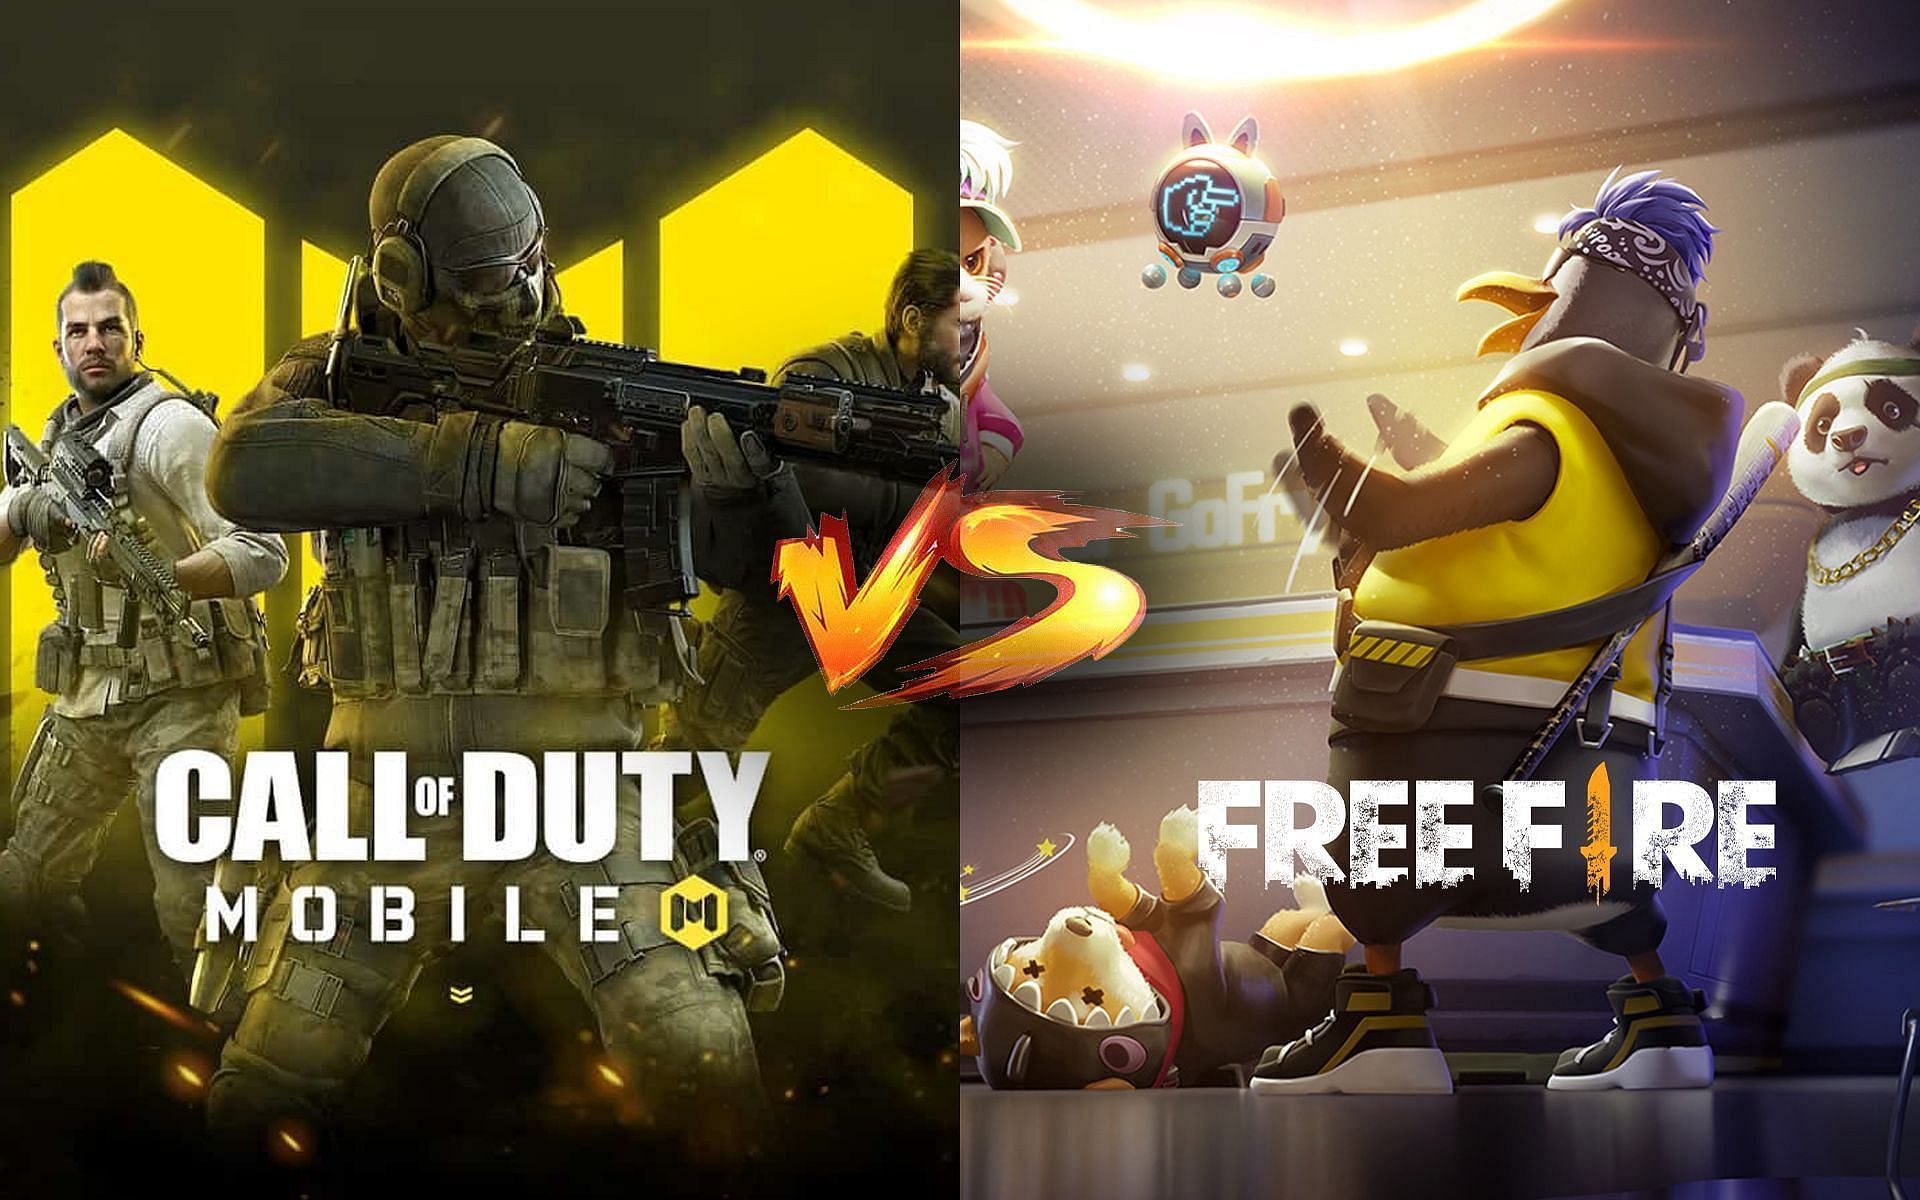 garena free fire max: Garena Free Fire Max redeem codes for Nov 1: Claim  free weapons today - The Economic Times